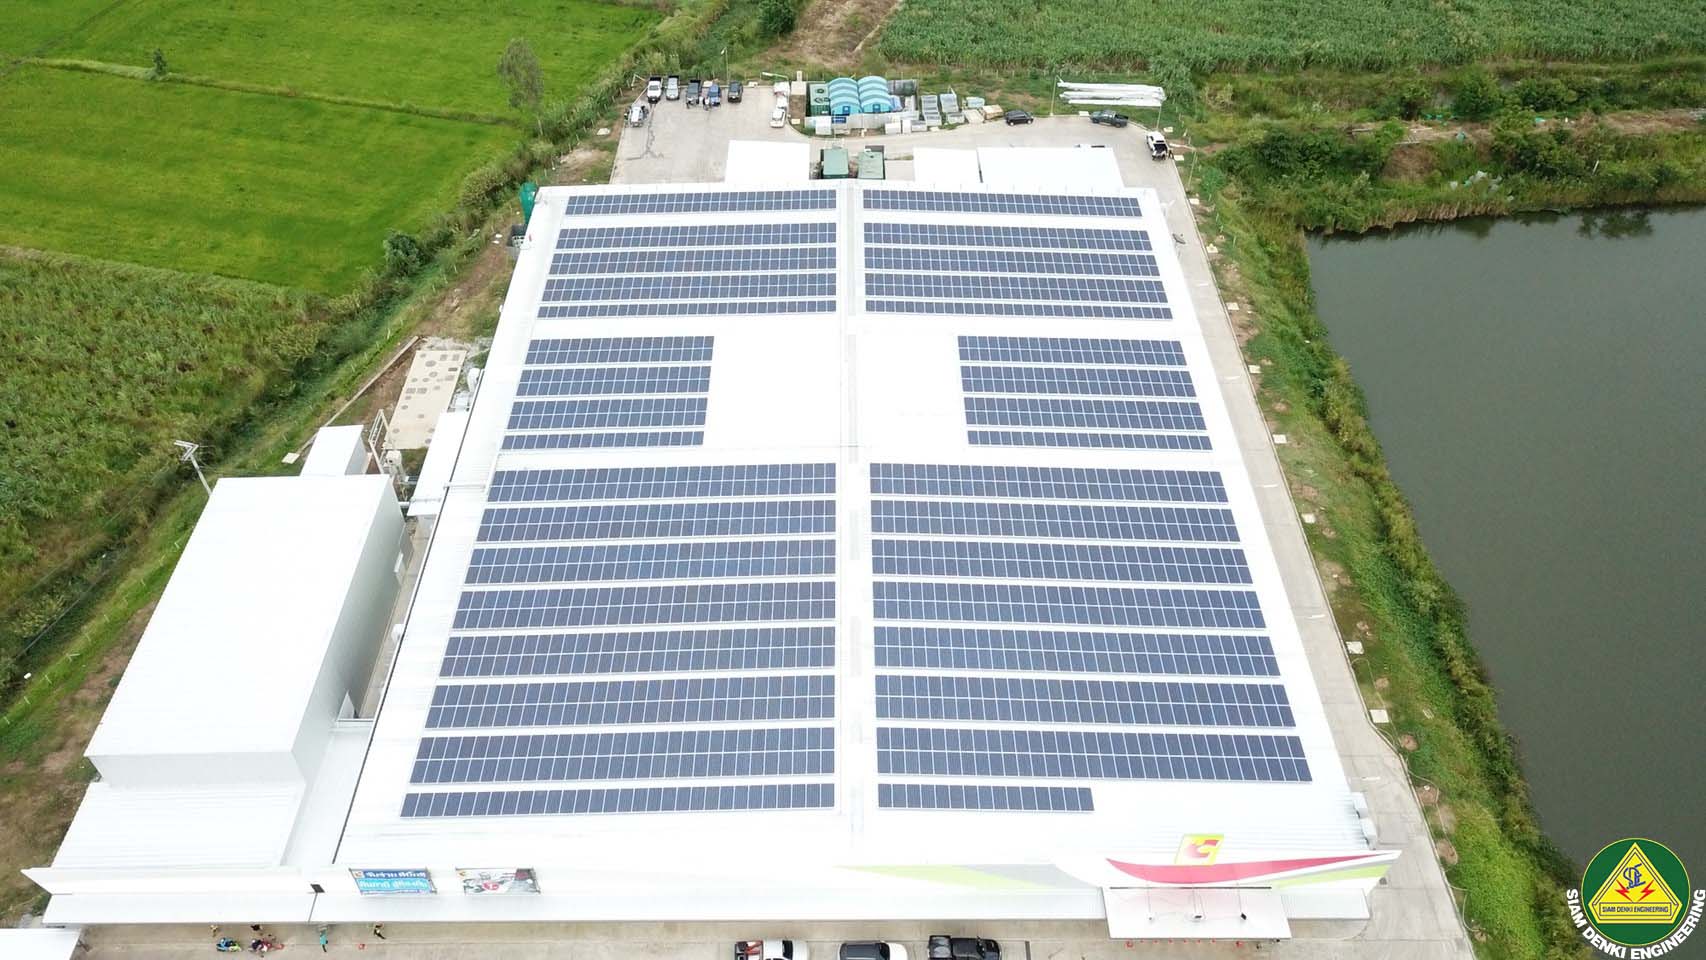 BIG C Solar Rooftop Phase 2.1 (BWCR) Wichienburi Project